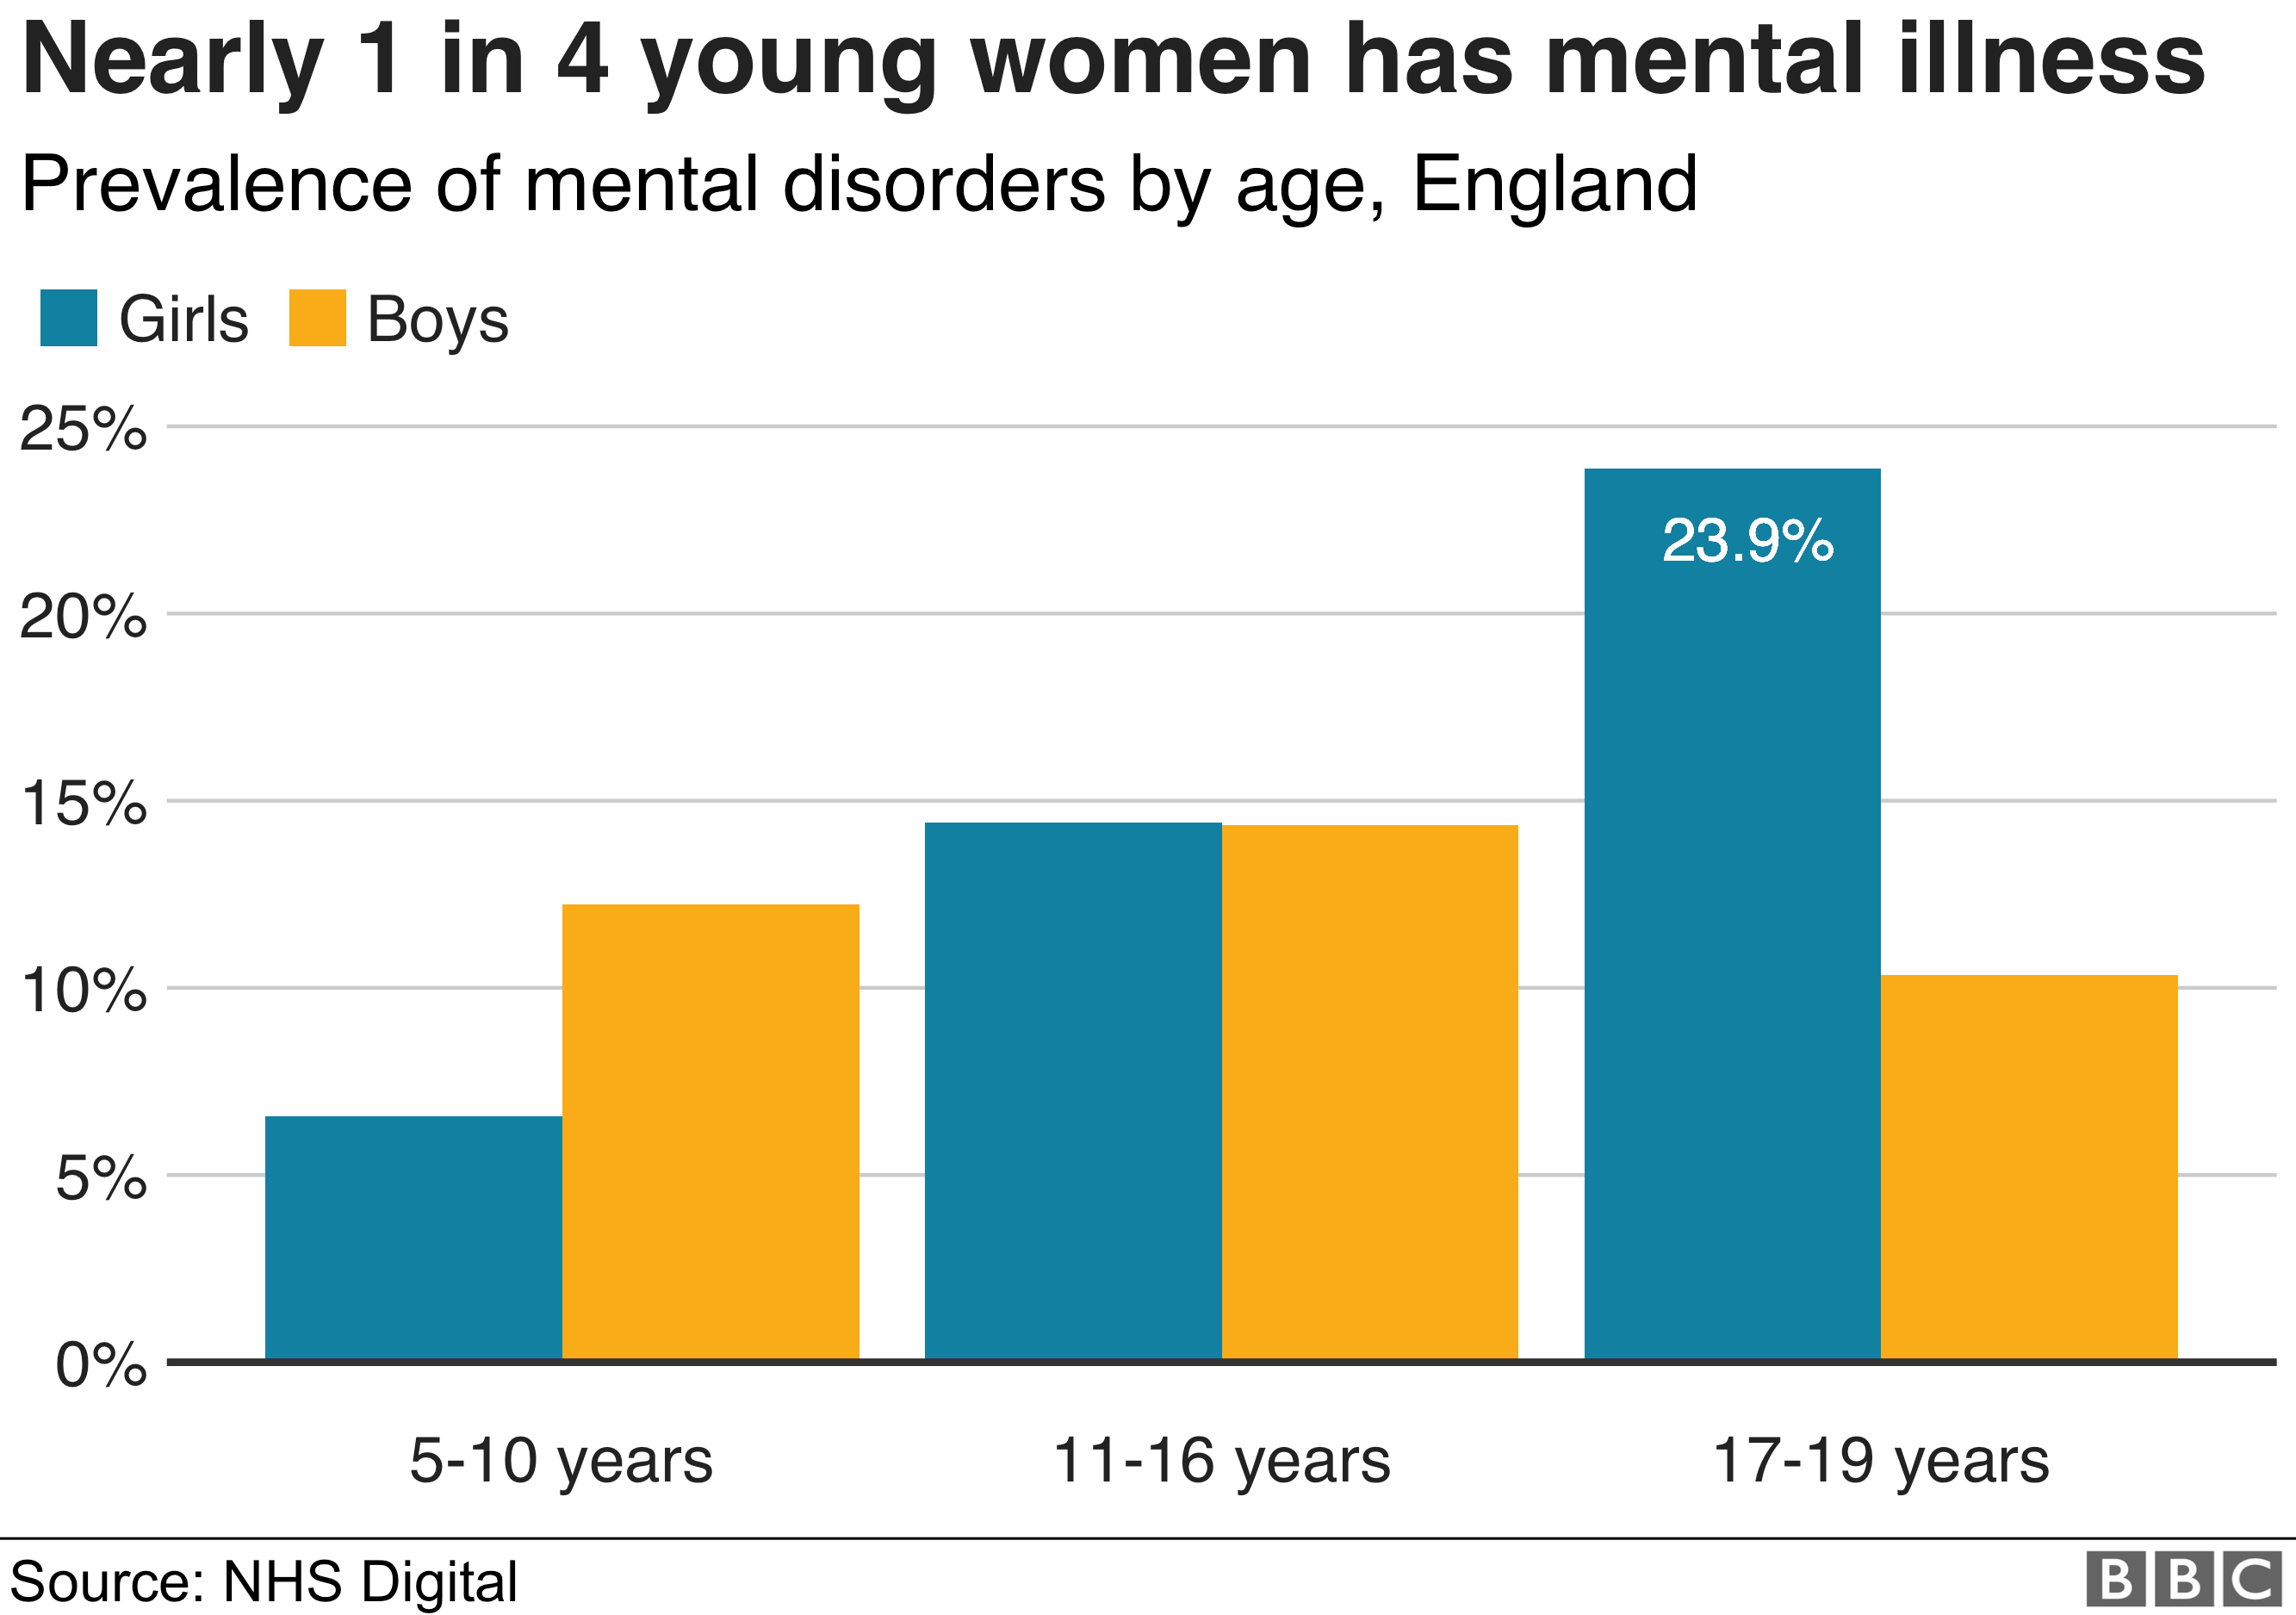 Chart: Nearly 1 in 4 young women has mental illness